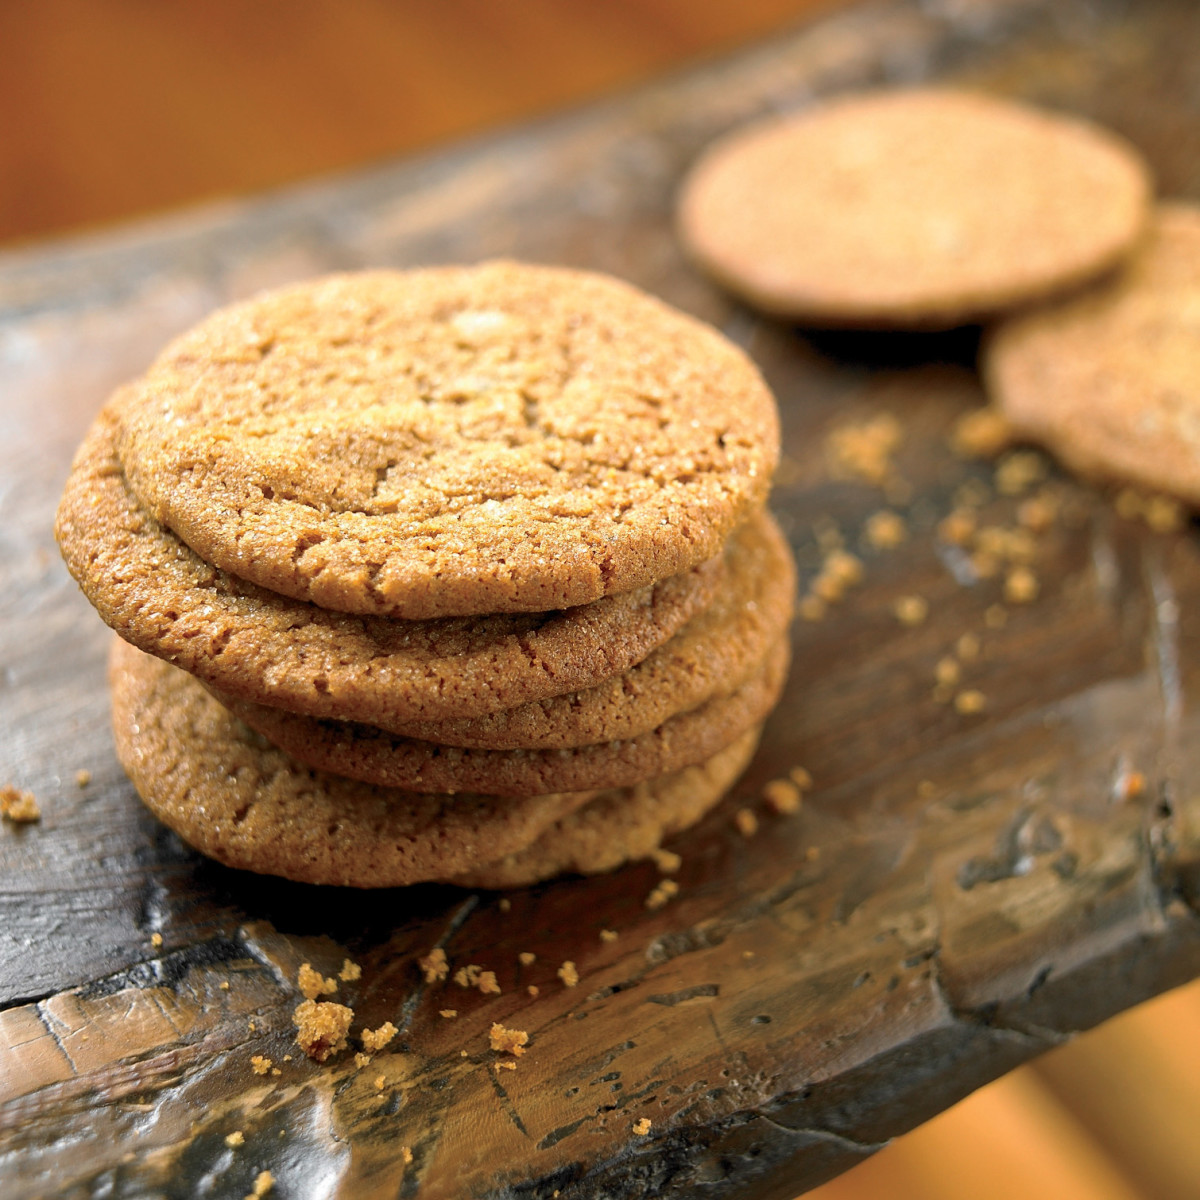 These chewy molasses ginger cookies recipe gets an extra spicy boost from chopped crystallized ginger.